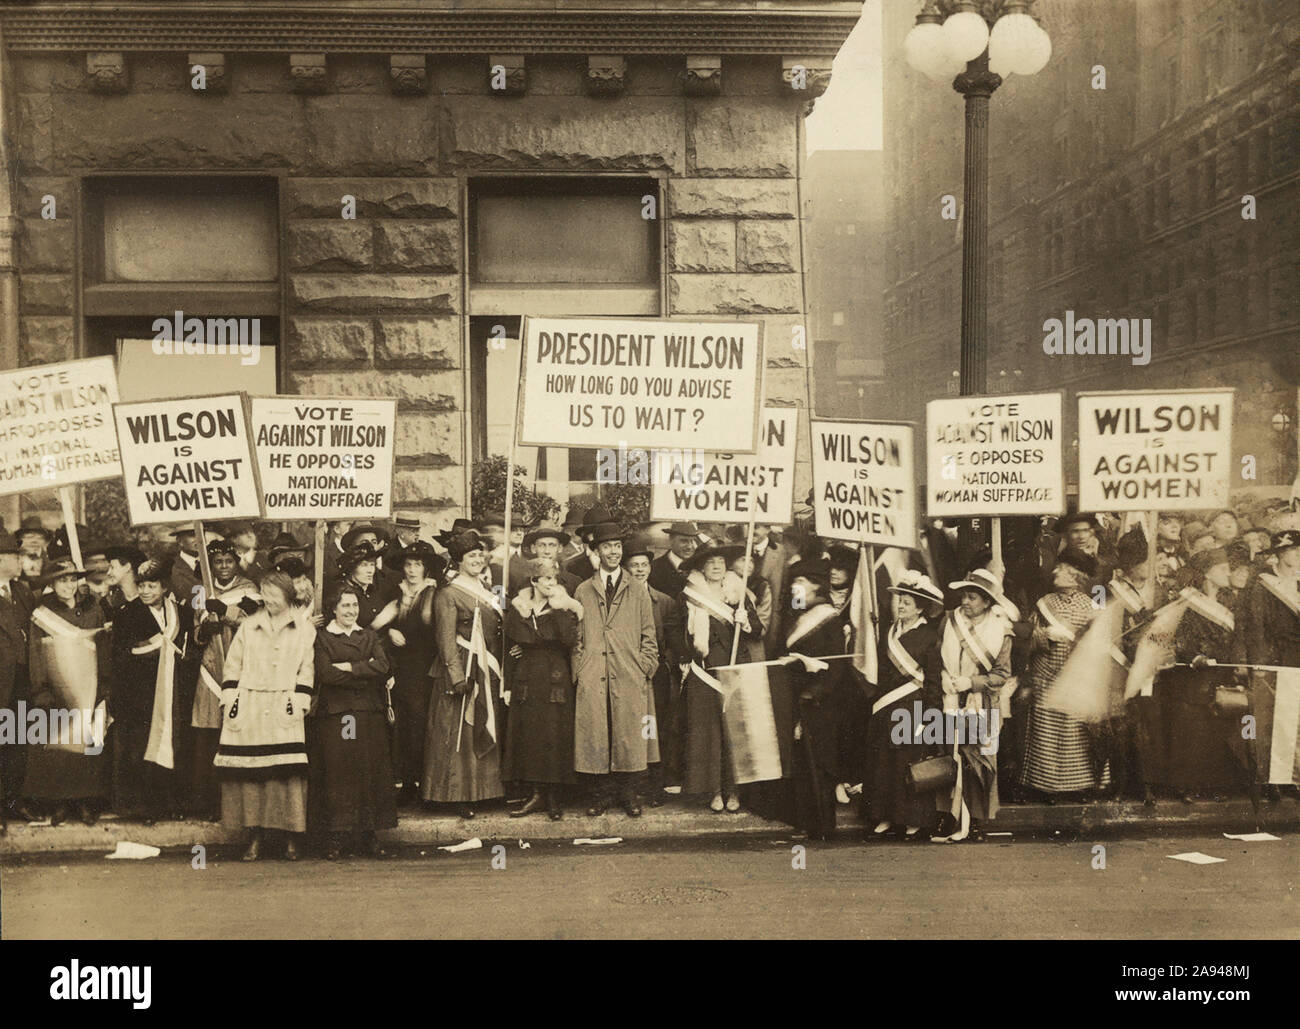 Suffragists Protest U.S. President Woodrow Wilson's Opposition to Woman Suffrage, Chicago, Illinois, USA, Photograph by Burke & Atwell, October 1916 Stock Photo